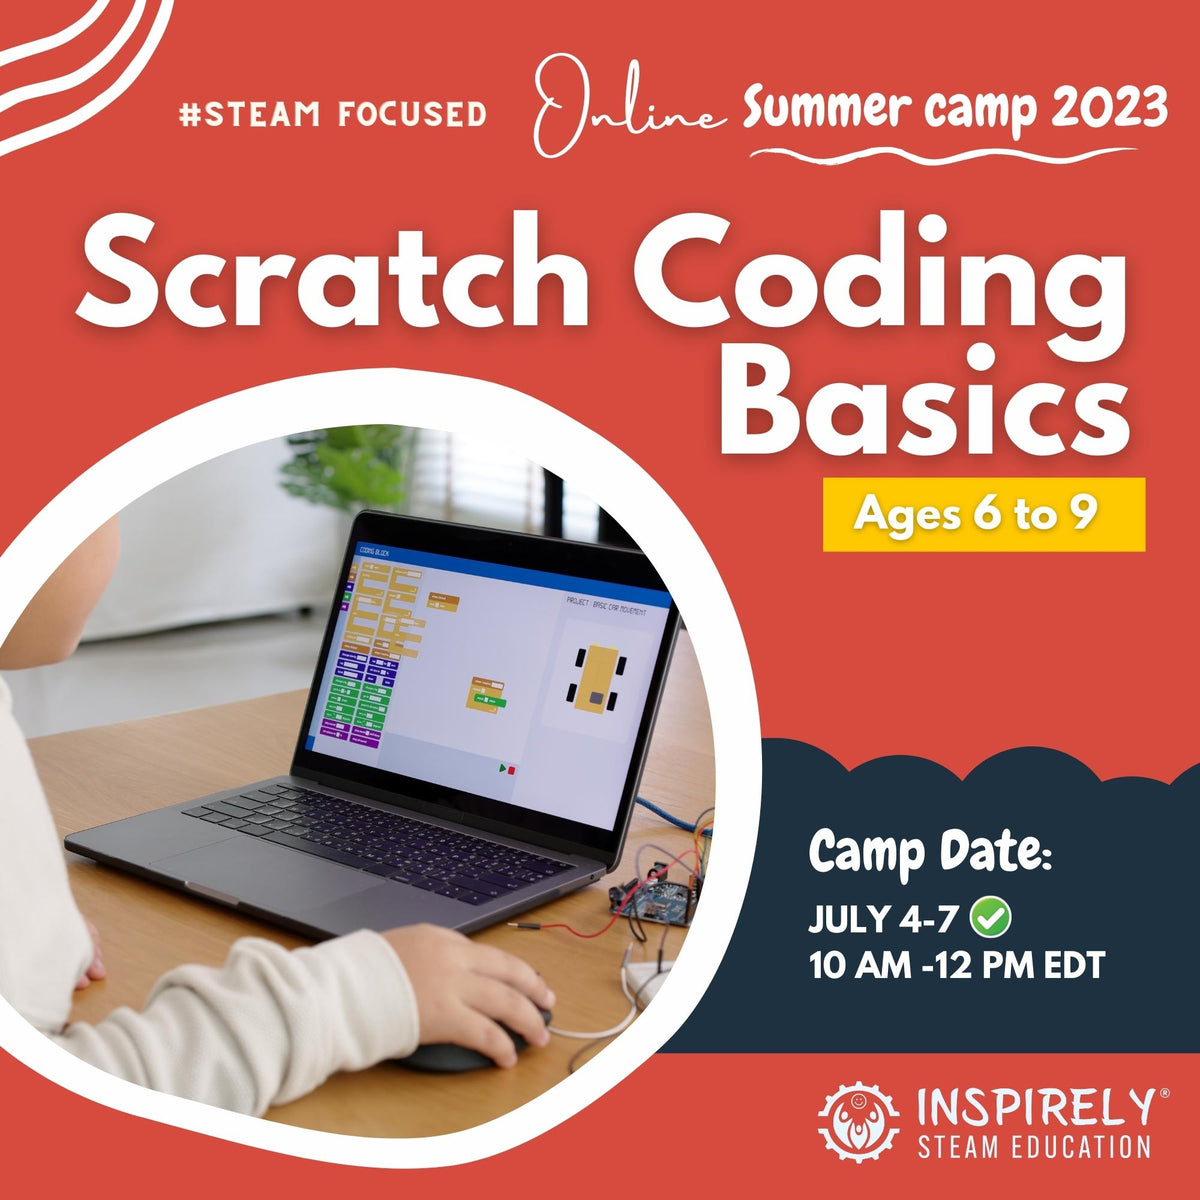 INSPIRELY STEAM Education Scratch coding summer camp Kids coding camp Best summer camps for coding Fun coding classes for kids Coding camp for children aged 6-14 Corporate social responsibility summer camp sponsorship Small business sponsorship for kids coding camp CSR summer camp sponsorship for kids Employee engagement summer camp sponsorship Customer appreciation summer camp sponsorship Logical thinking Coding camp Canadian educator Multi-camp discount